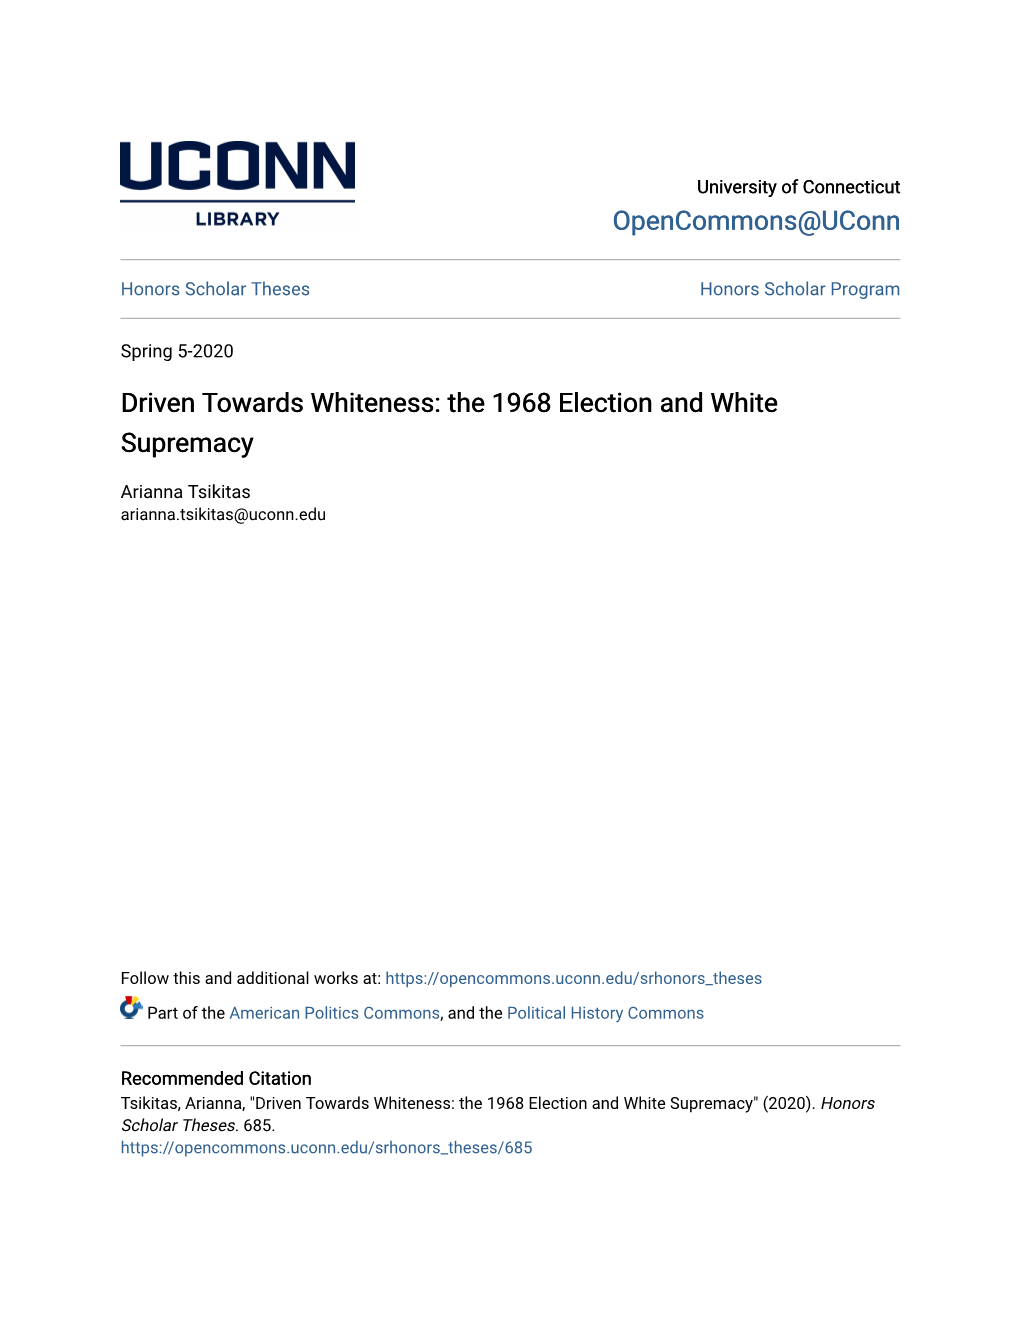 Driven Towards Whiteness: the 1968 Election and White Supremacy